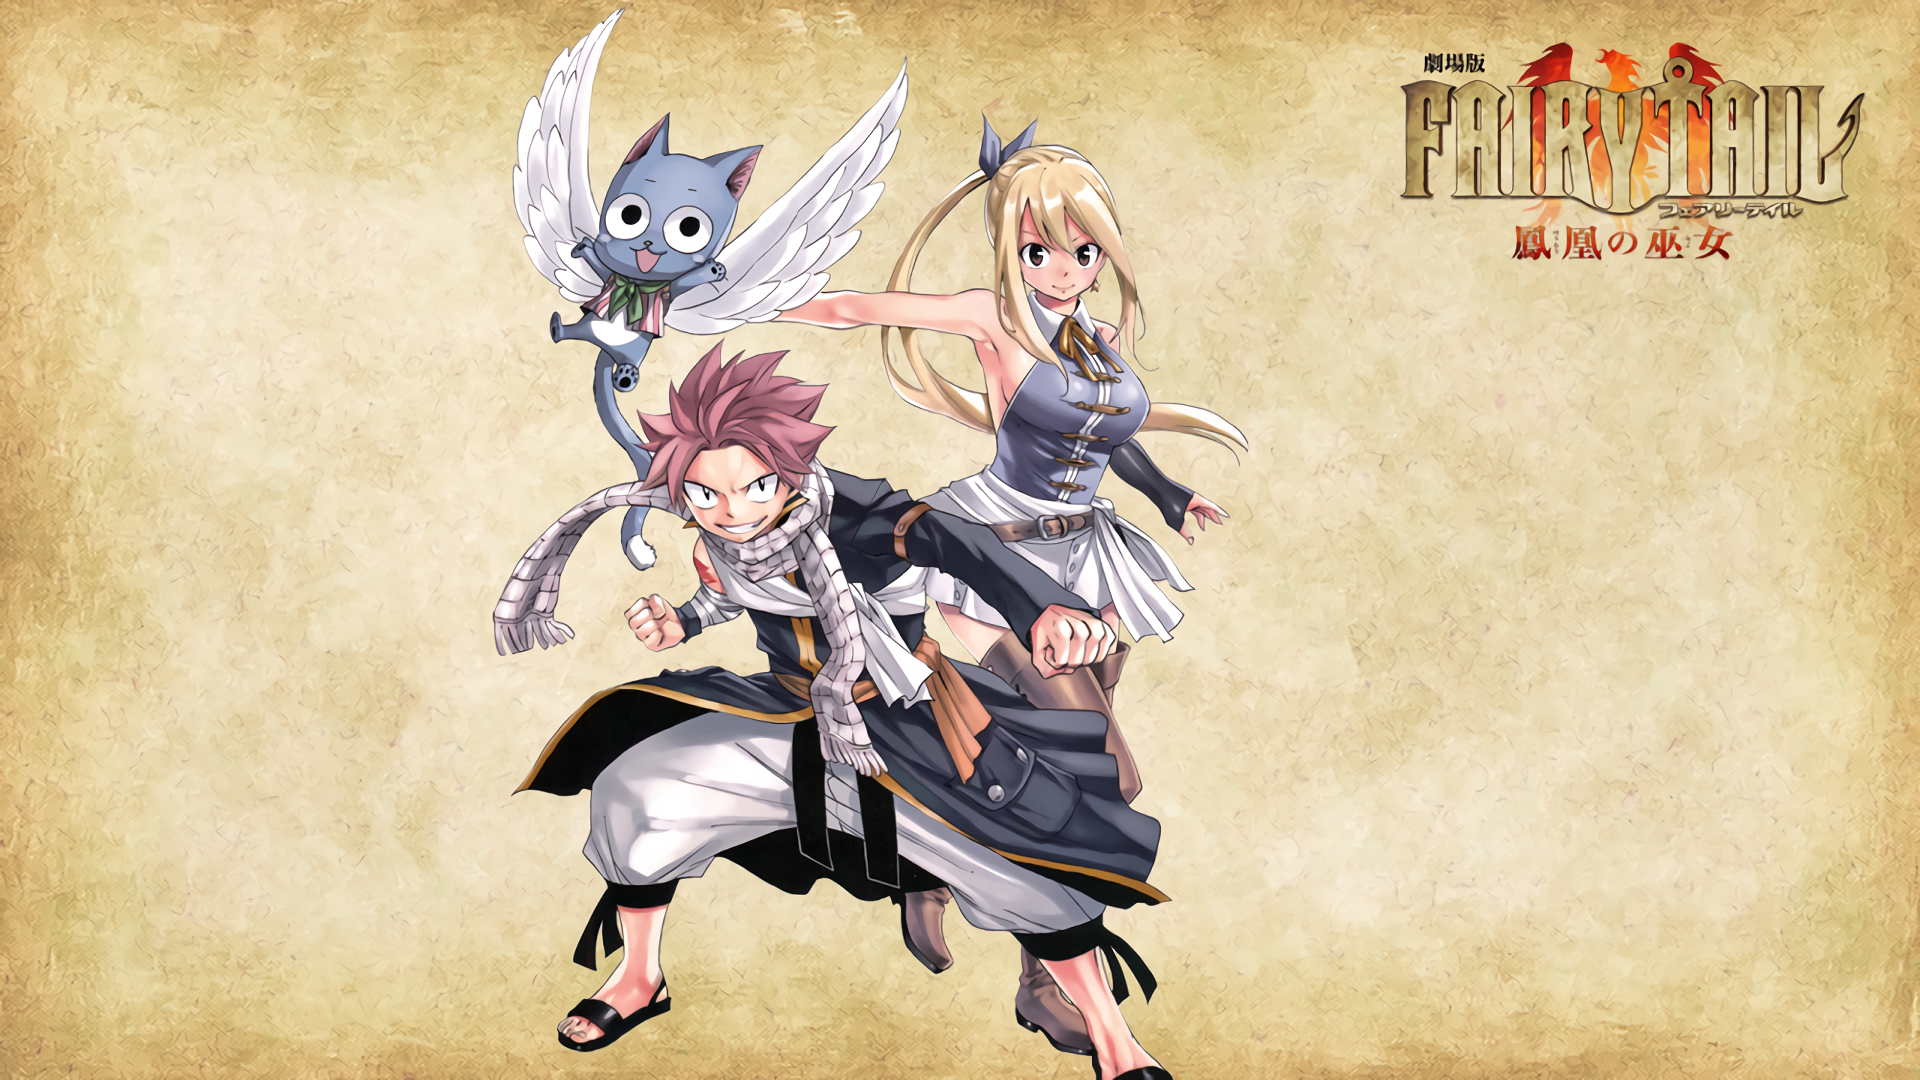 Fairy Tail Hd Wallpaper Background Image 19x1080 Id 8518 Wallpaper Abyss